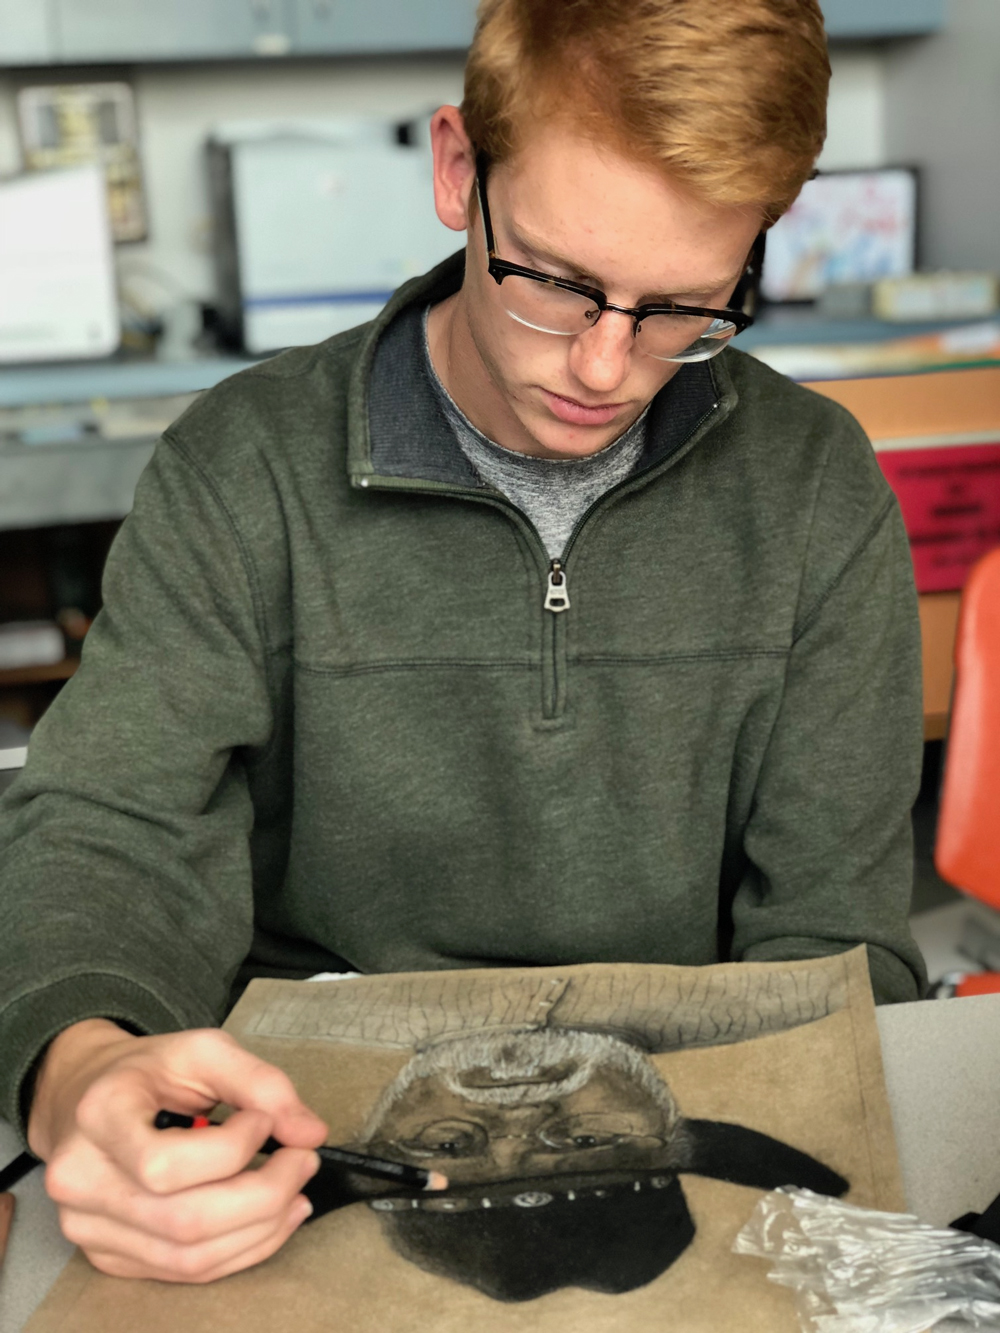  Andrew Beck from Ross S. Sterling High School works on a piece for the 2018 Houston Livestock Show and Rodeo’s School Art contest.
